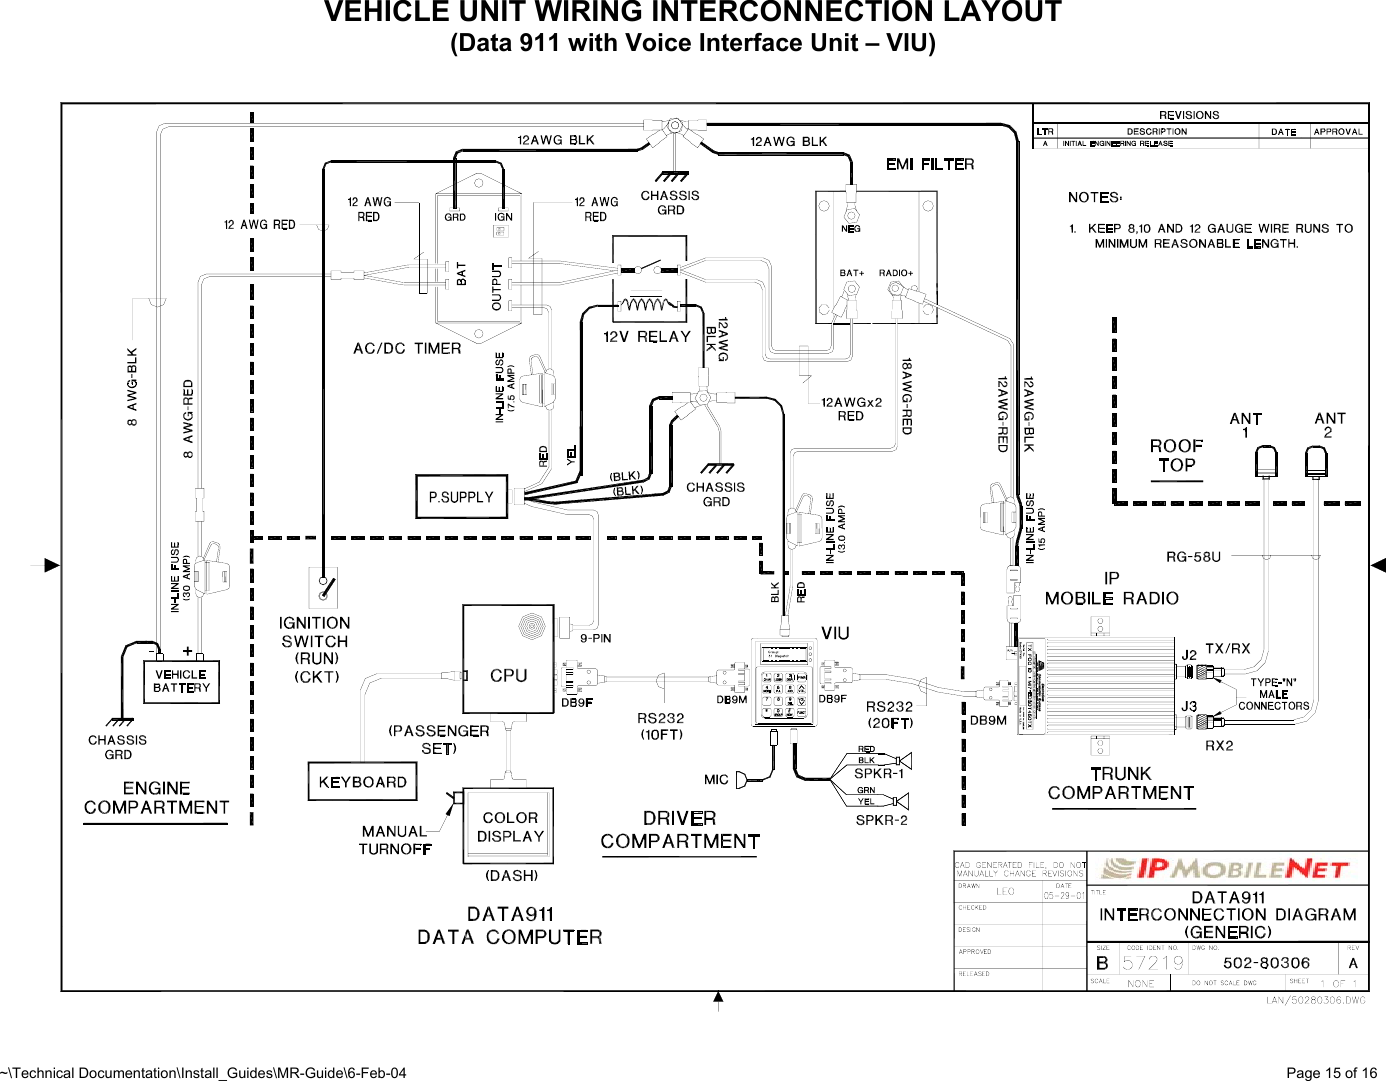 ~\Technical Documentation\Install_Guides\MR-Guide\6-Feb-04   Page 15 of 16 VEHICLE UNIT WIRING INTERCONNECTION LAYOUT (Data 911 with Voice Interface Unit – VIU)        